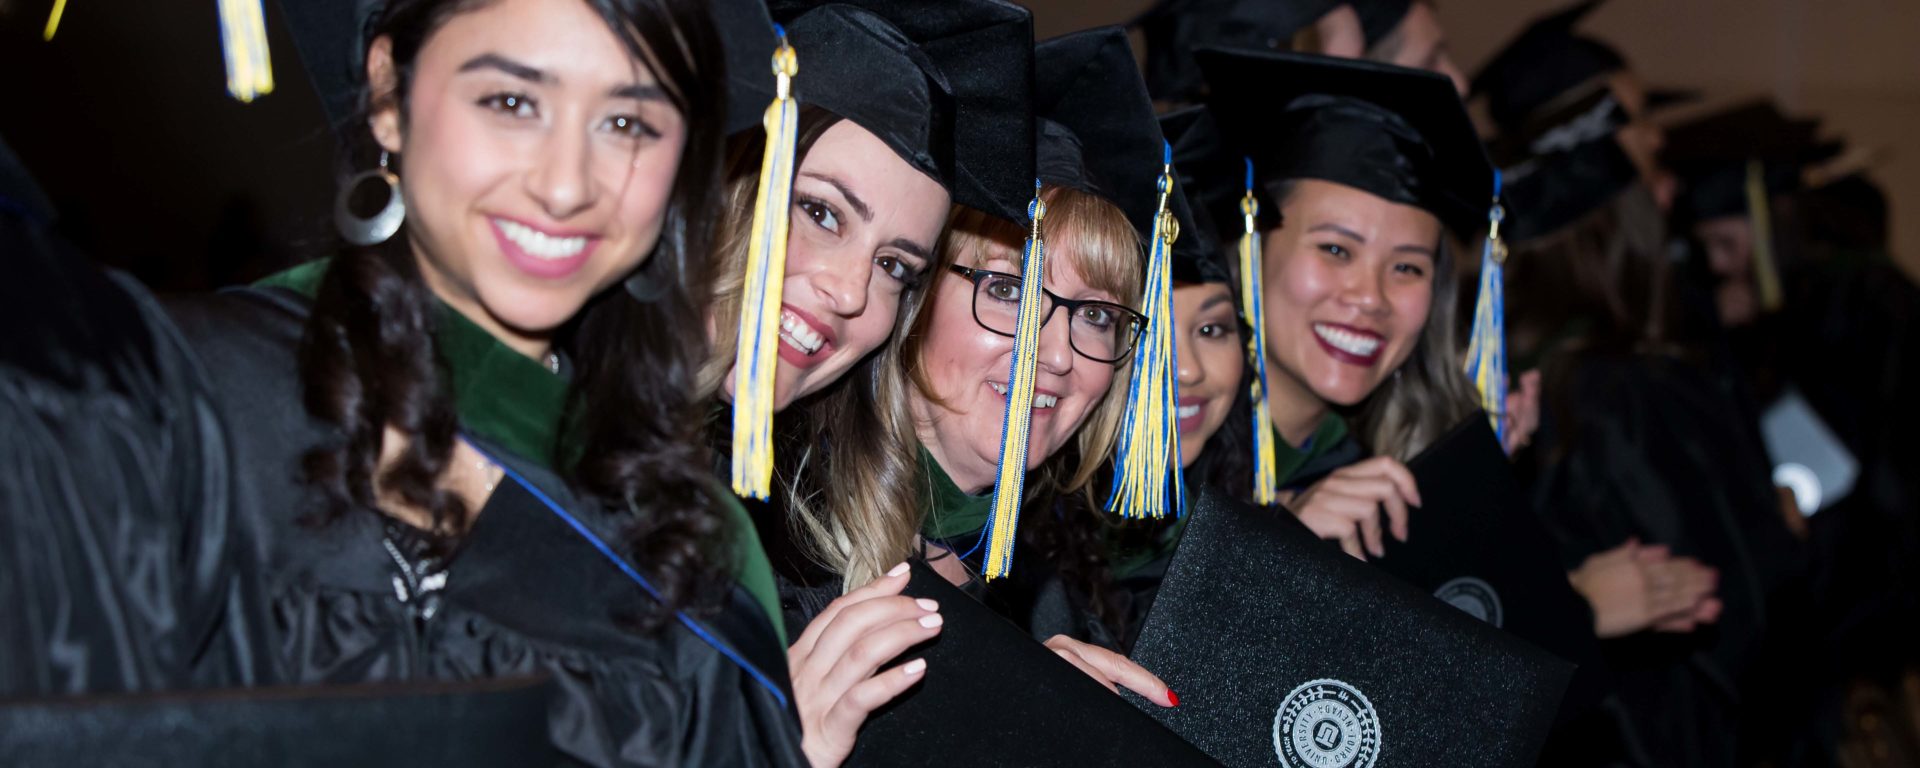 Touro University Nevada celebrated the academic achievements of students from the Schools of Physician Assistant Studies (PA), Nursing, and Education during Winter Commencement at the Paris Las Vegas on Nov. 3.